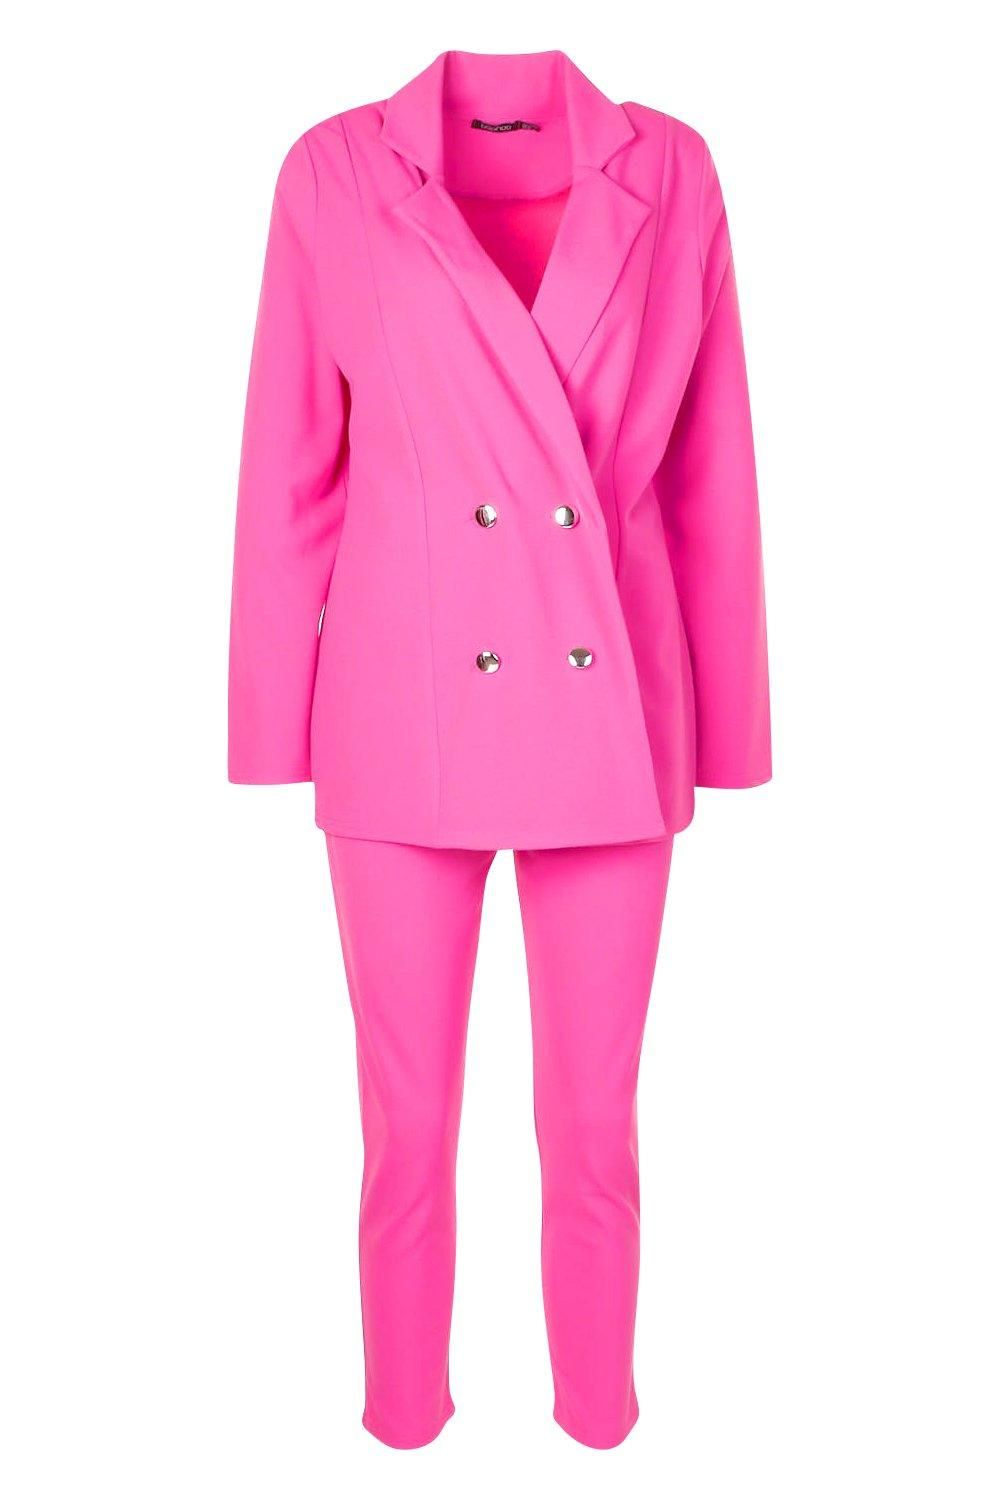 Double Breasted Blazer And Pants Suit Set | Boohoo.com (US & CA)